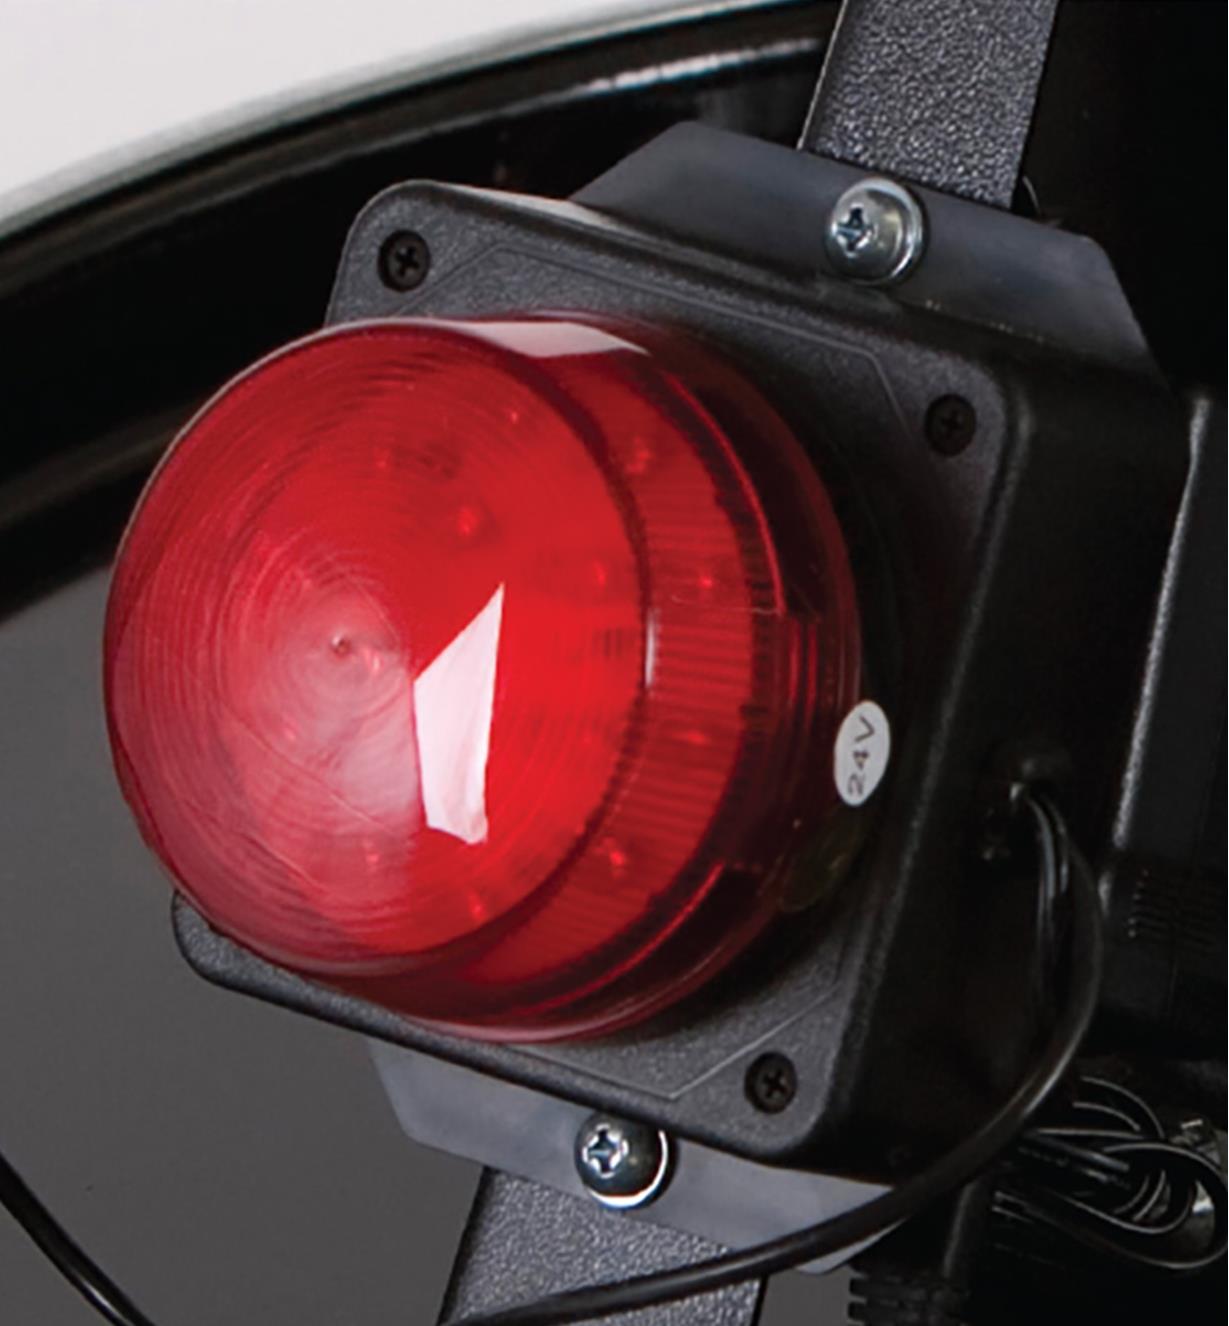 A red light bolted to the frame of the Oneida V-1500 dust collector